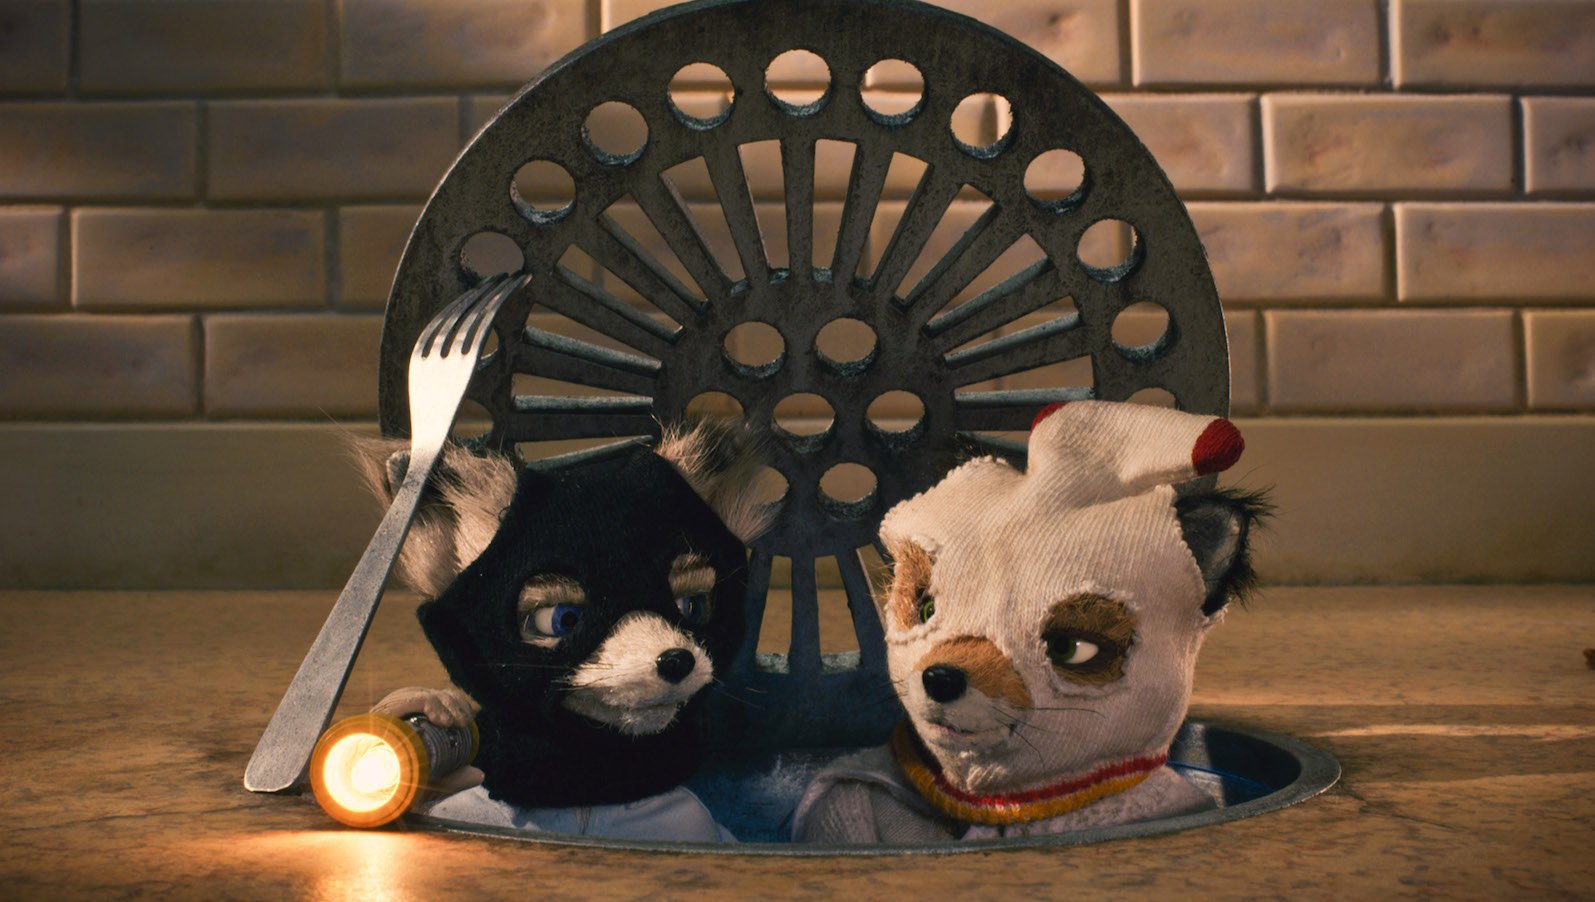 Two stop motion foxes with socks on their heads pop their heads out of a sewer manhole cover